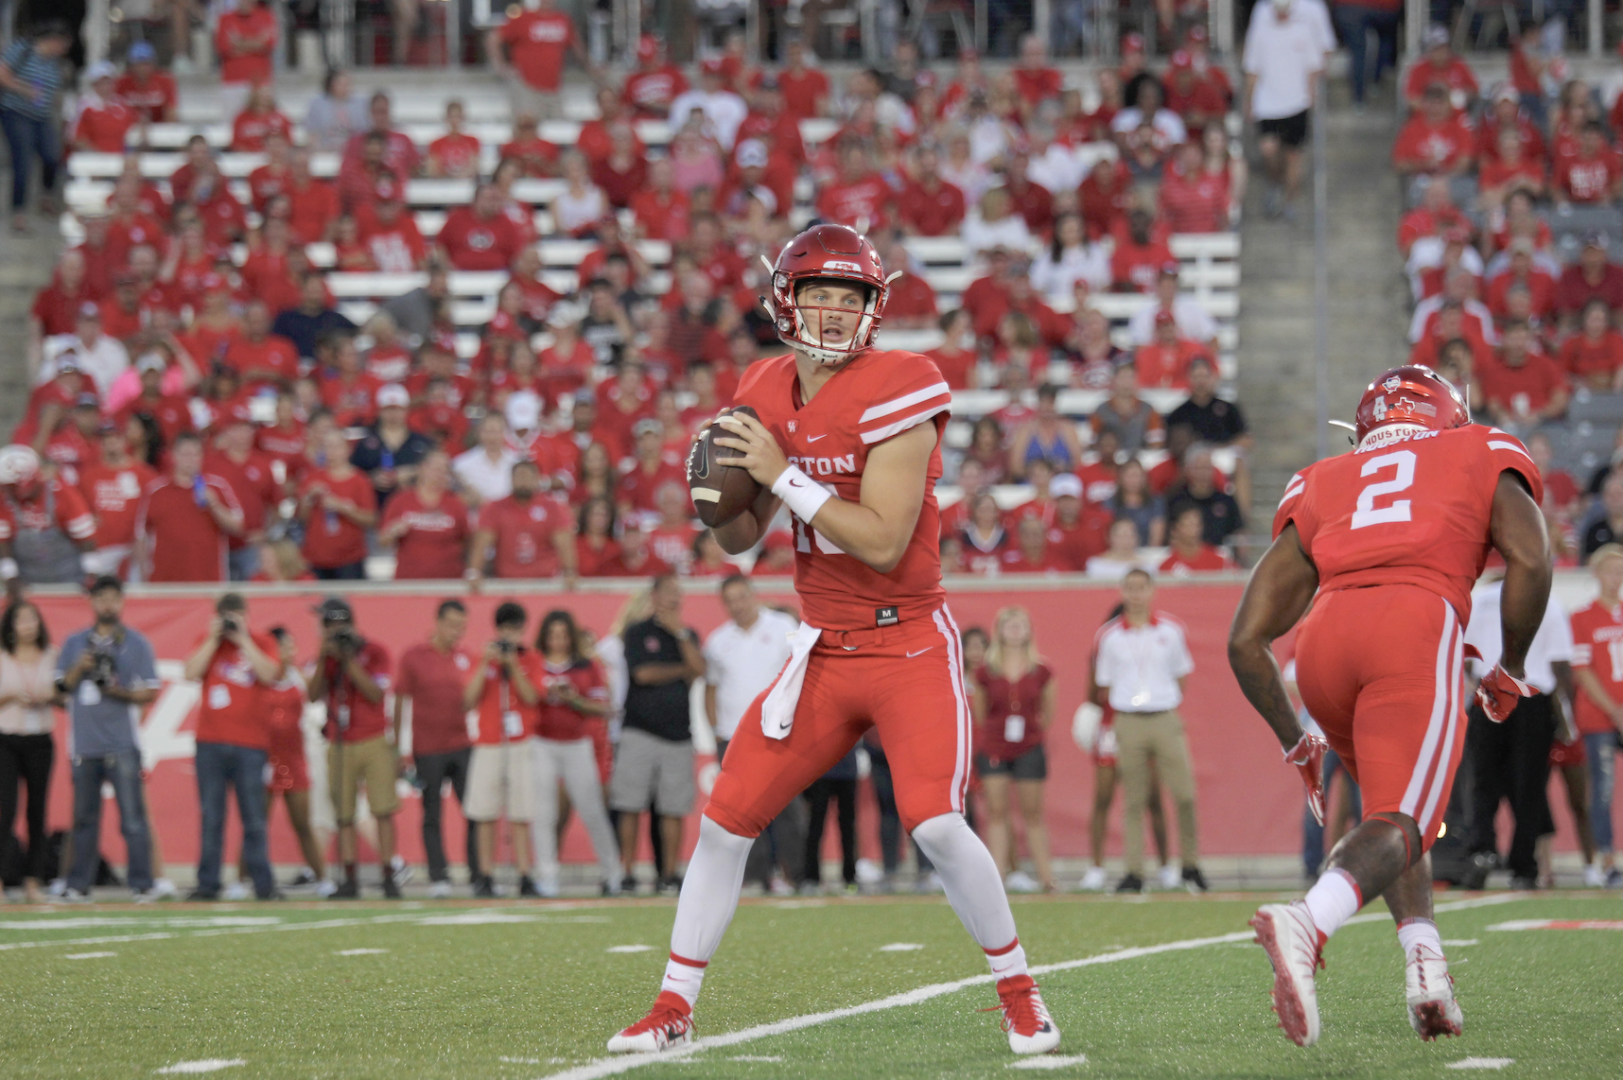 Former Cougar quarterback Kyle Allen returned to Houston on Sunday night as the Carolina Panthers' starter, years after he last played for UH. | File photo